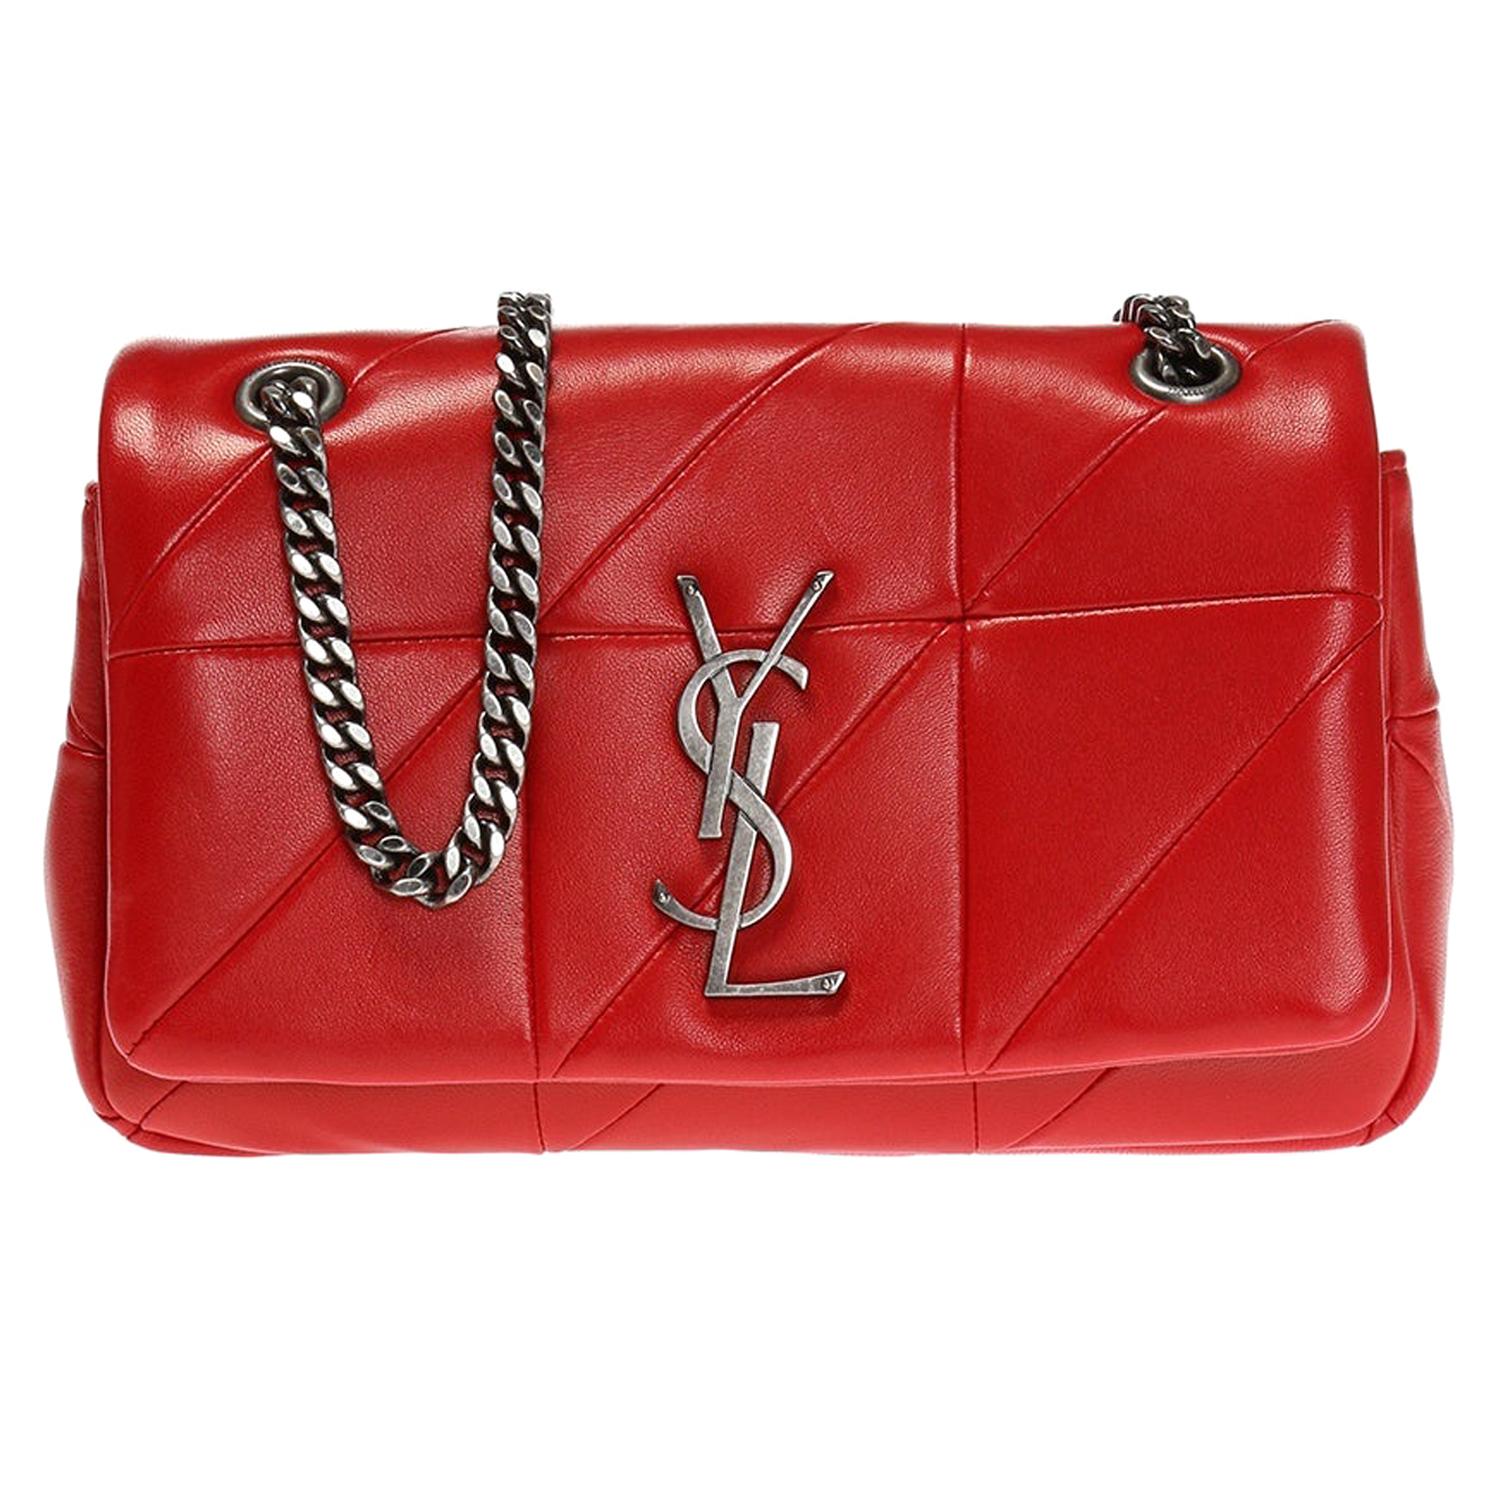 Saint Laurent Small Red Soft Leather "Jamie" Bag with Silver-Tone Hardware